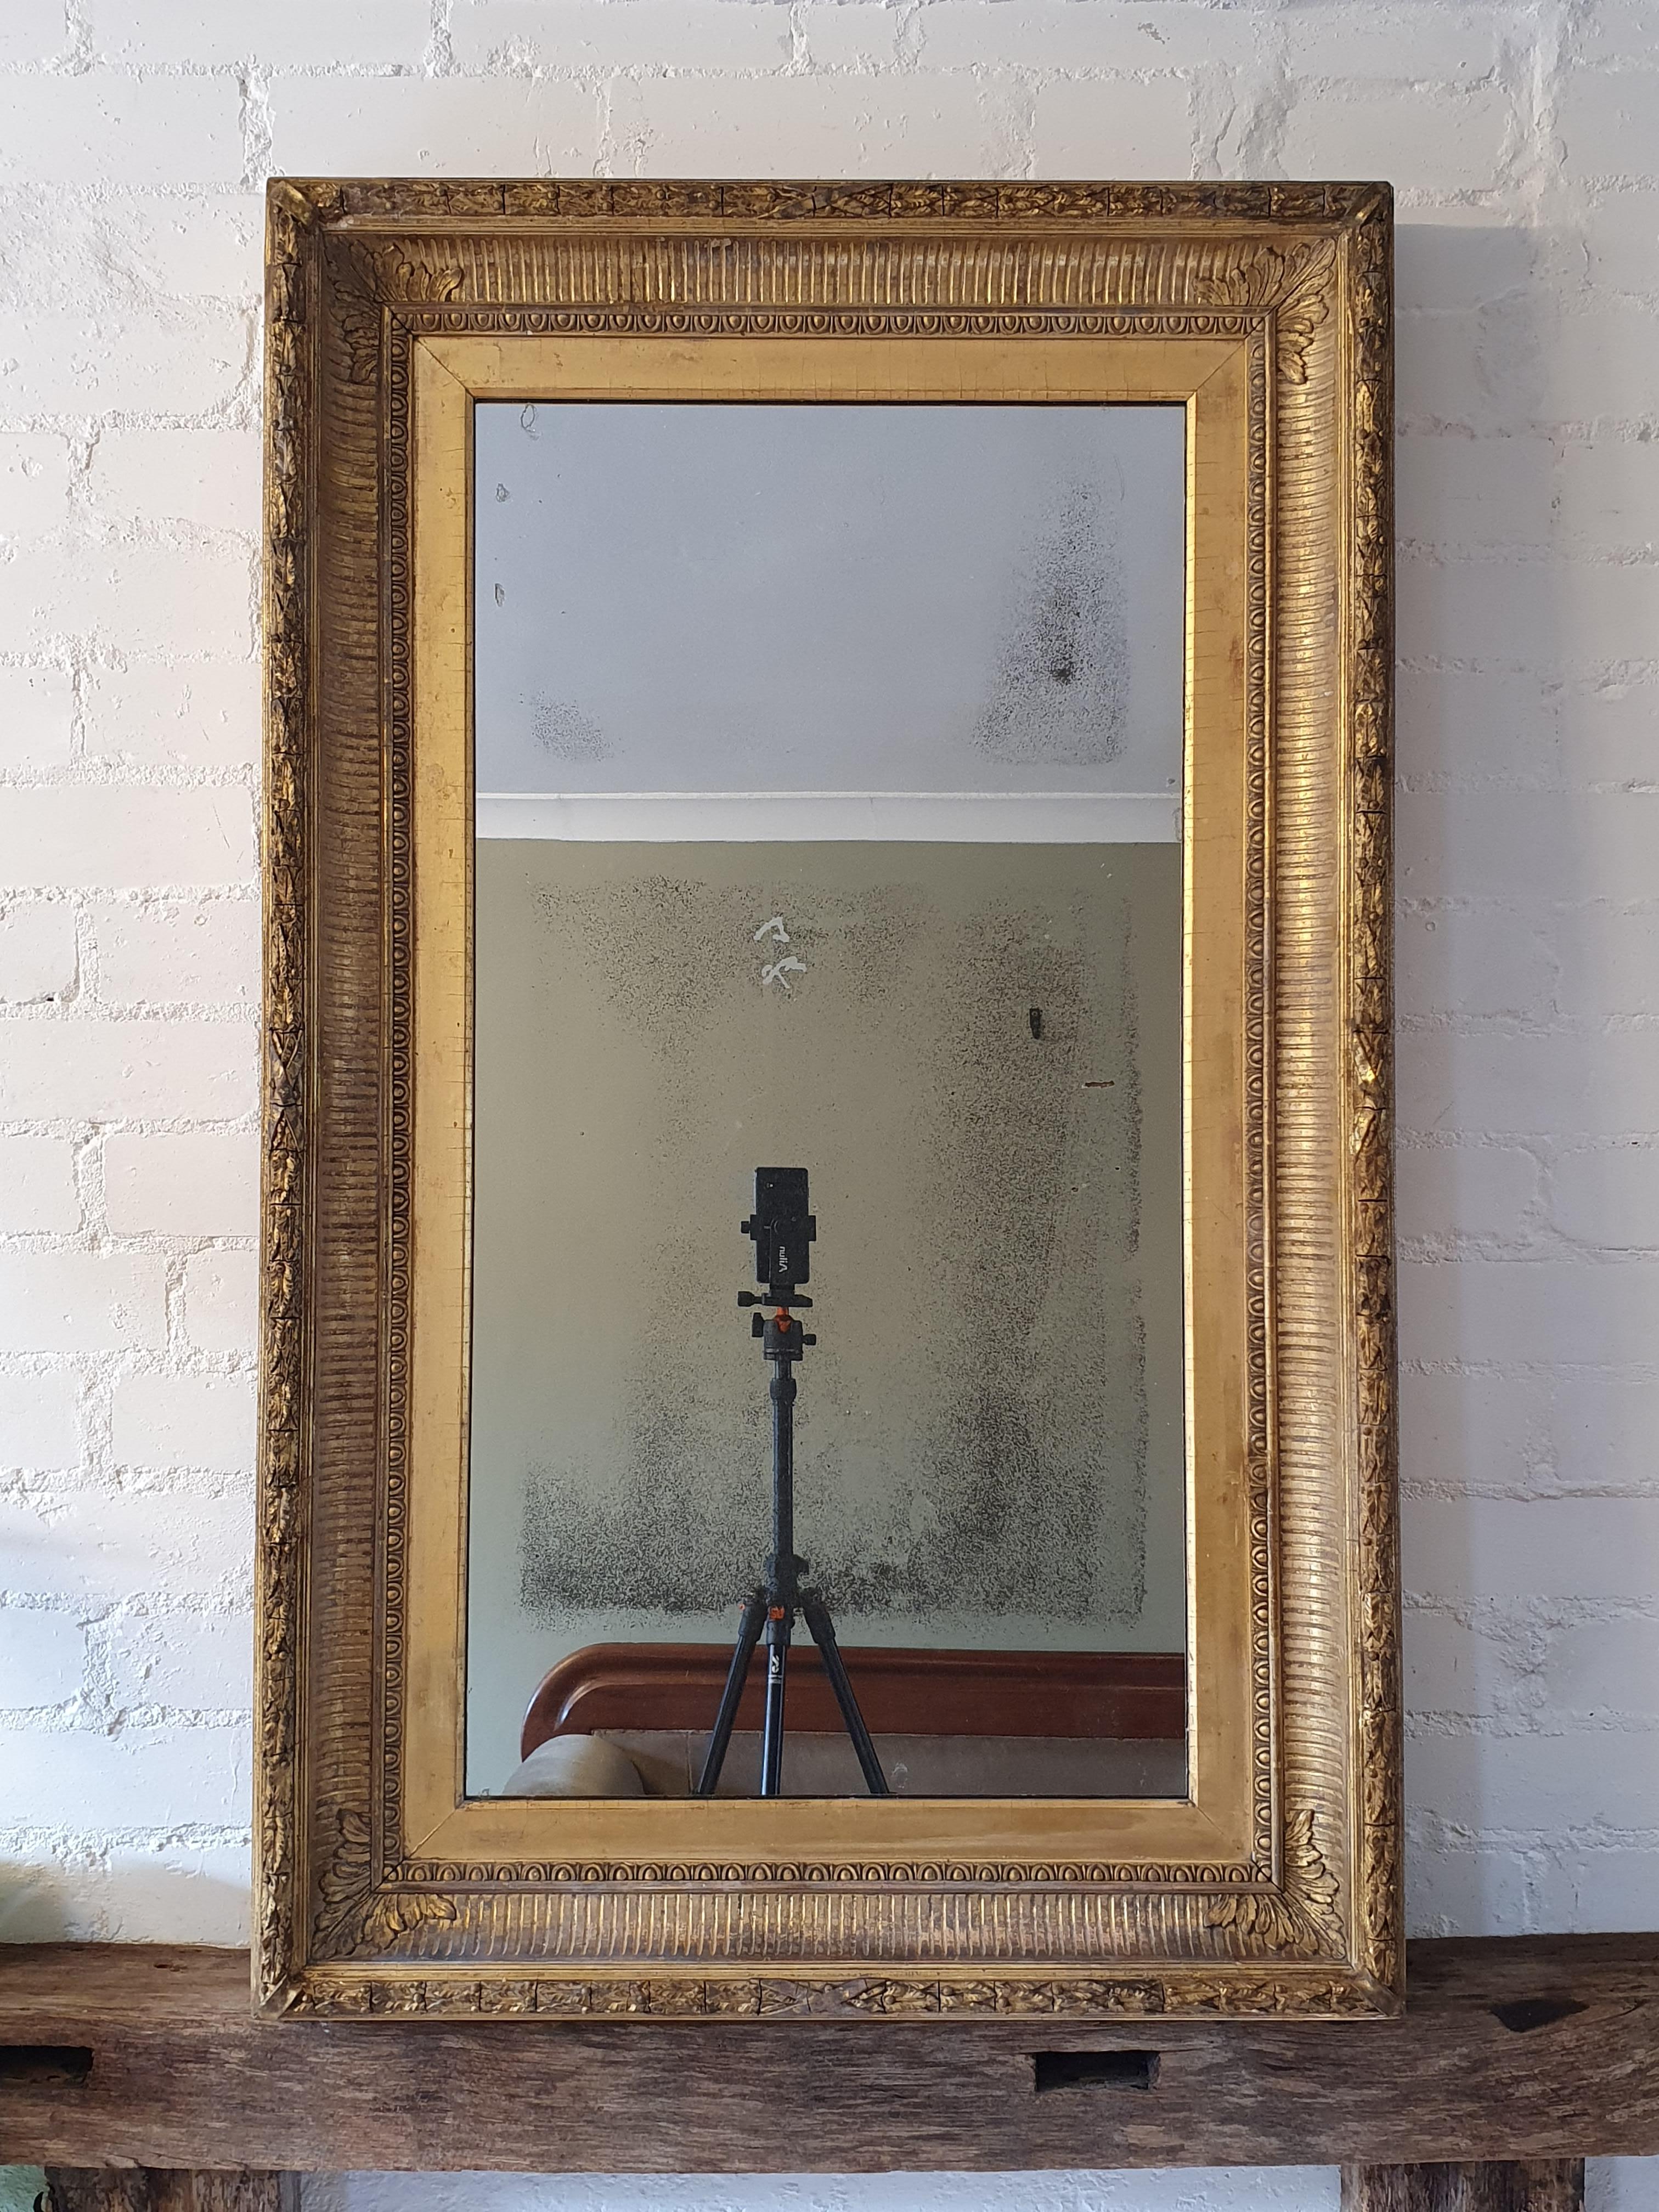 Pair of 19th century English wall mirrors, in neoclassical style. They have original gilding and mercury glass plates ( with some foxing and scratches typical for age). Frames can be positioned vertically or horizontally.
   